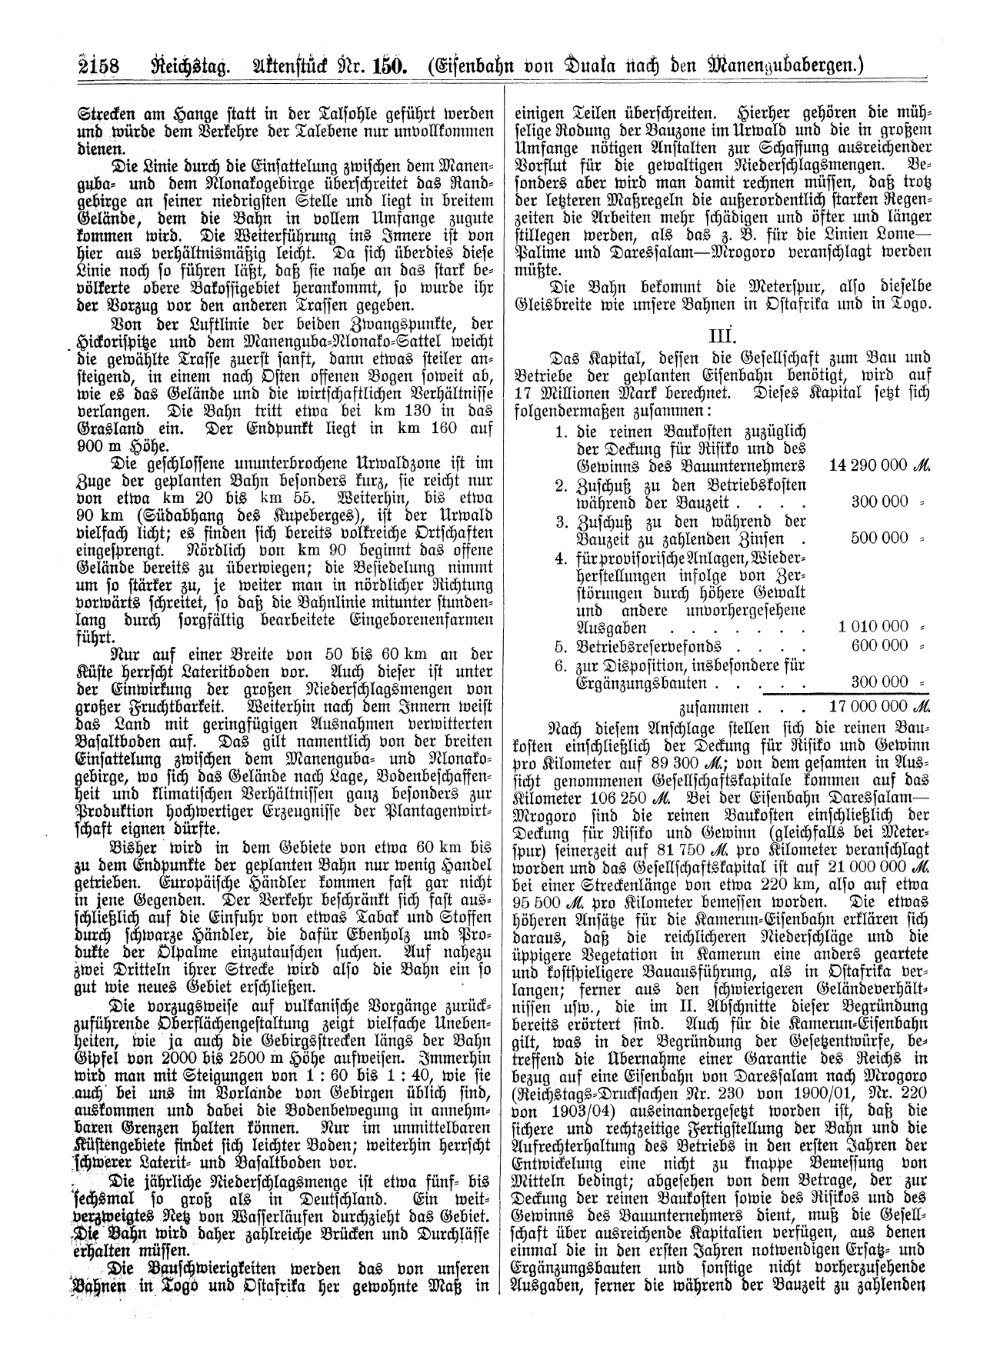 Scan of page 2158